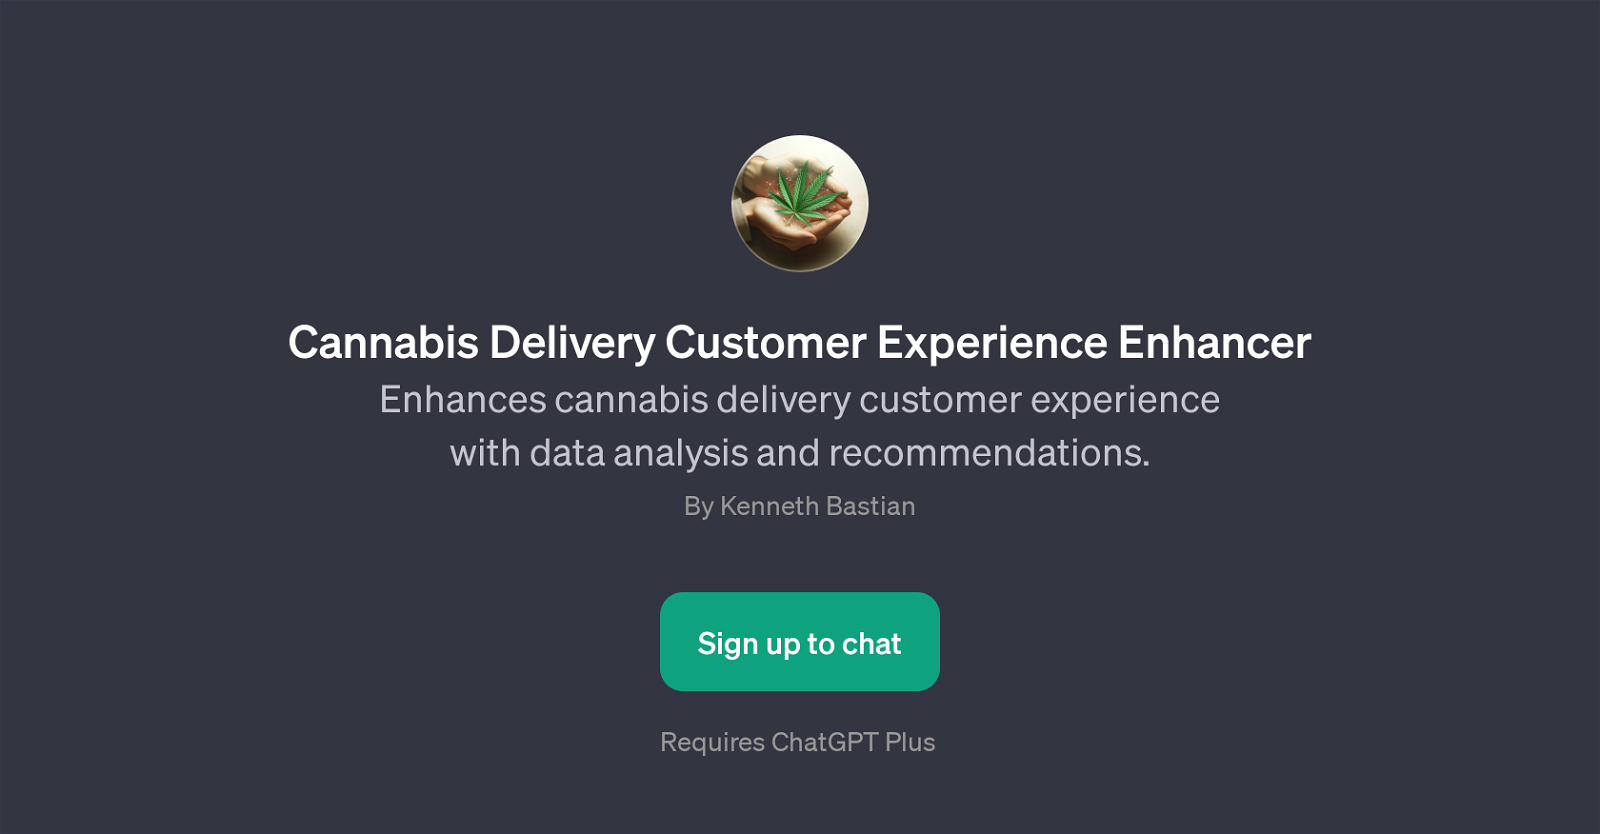 Cannabis Delivery Customer Experience Enhancer website